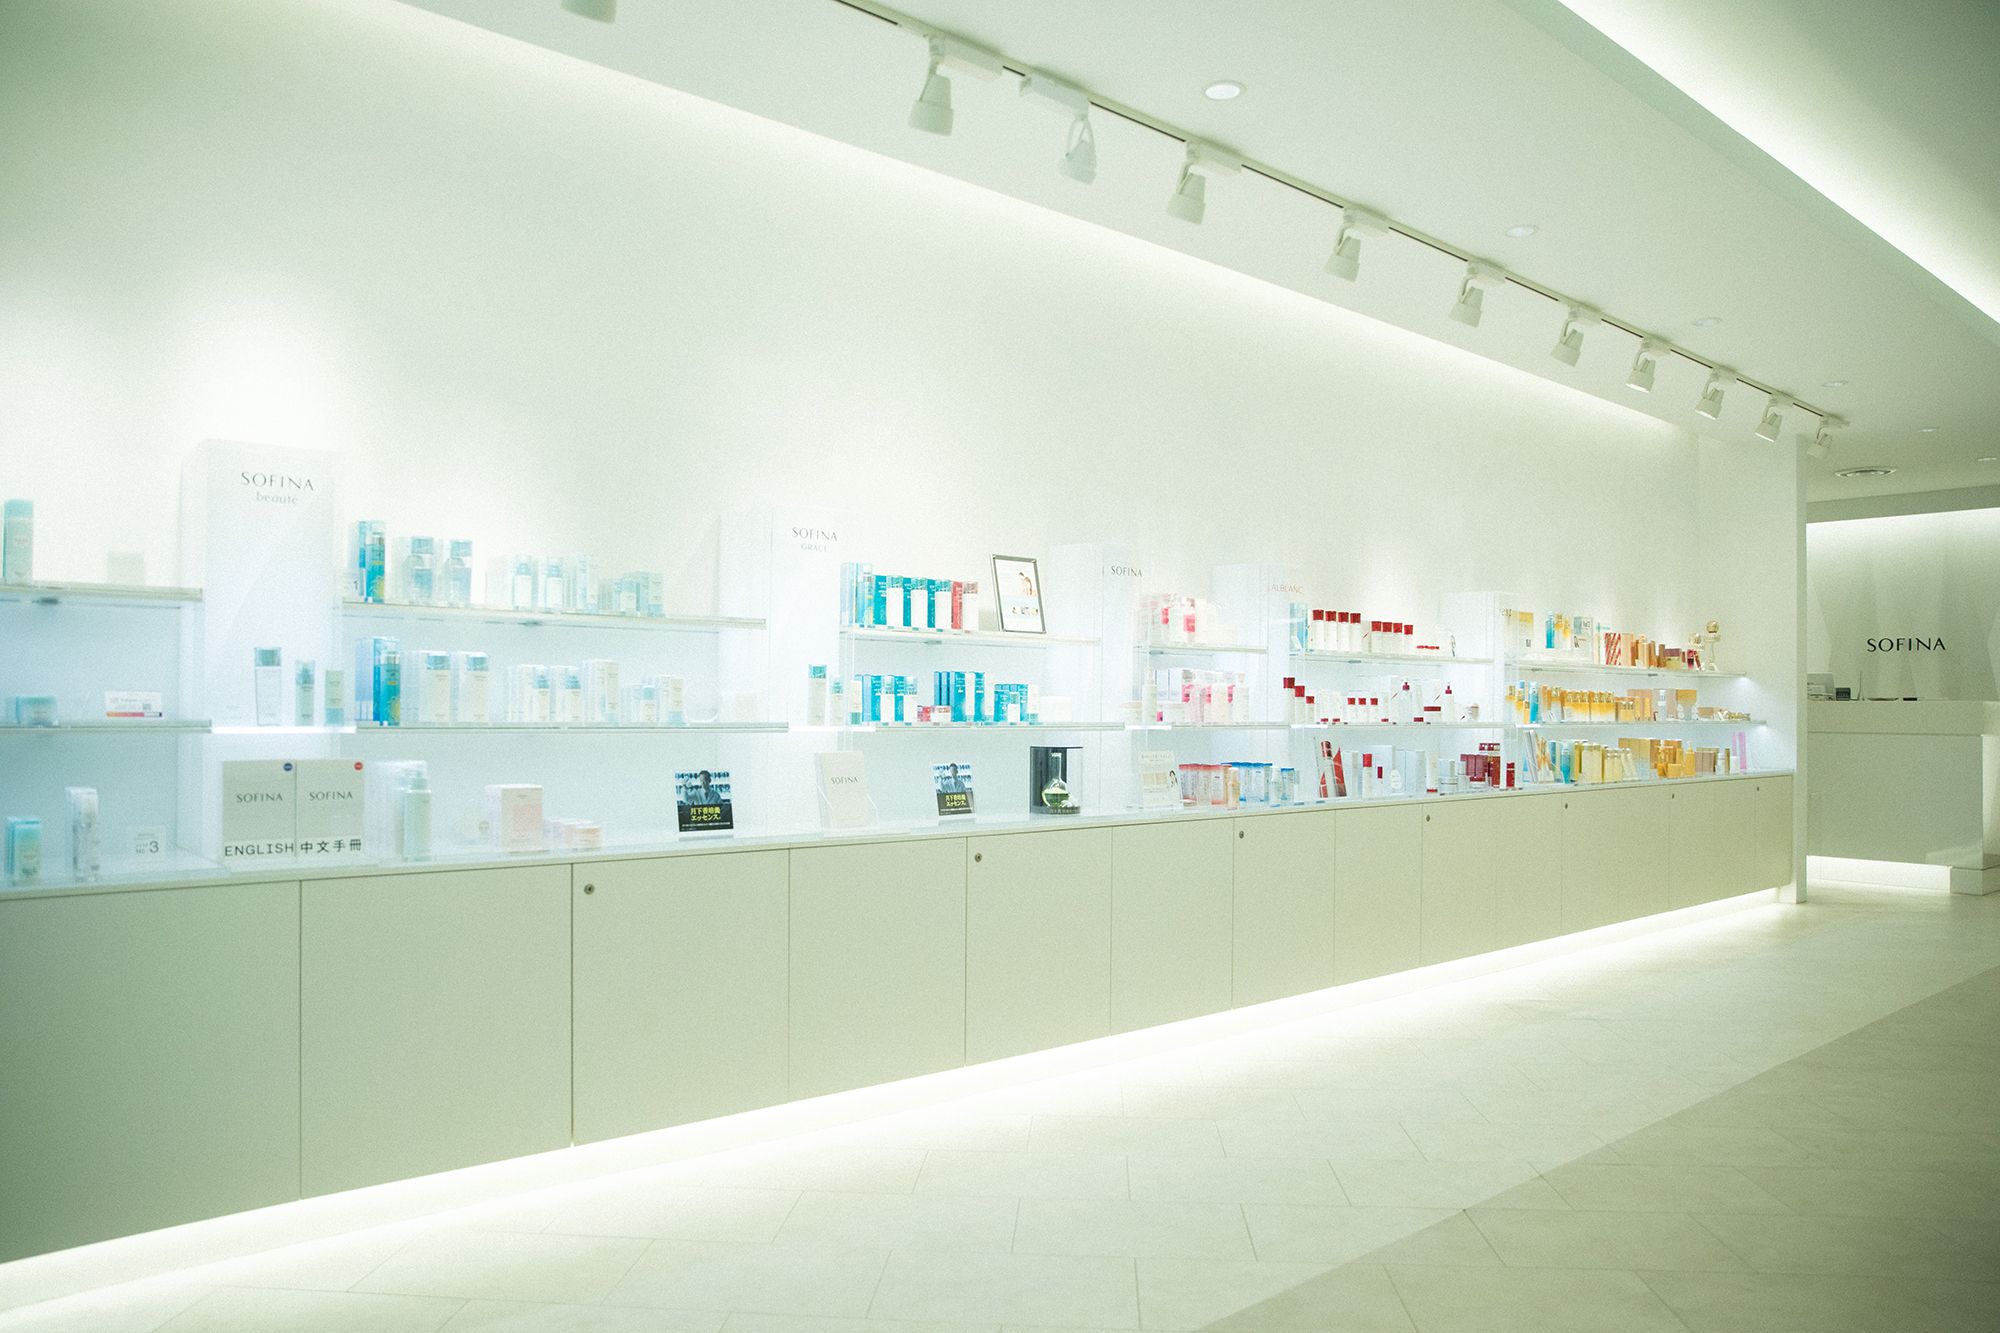 SOFINA products can be purchased at Ginza.